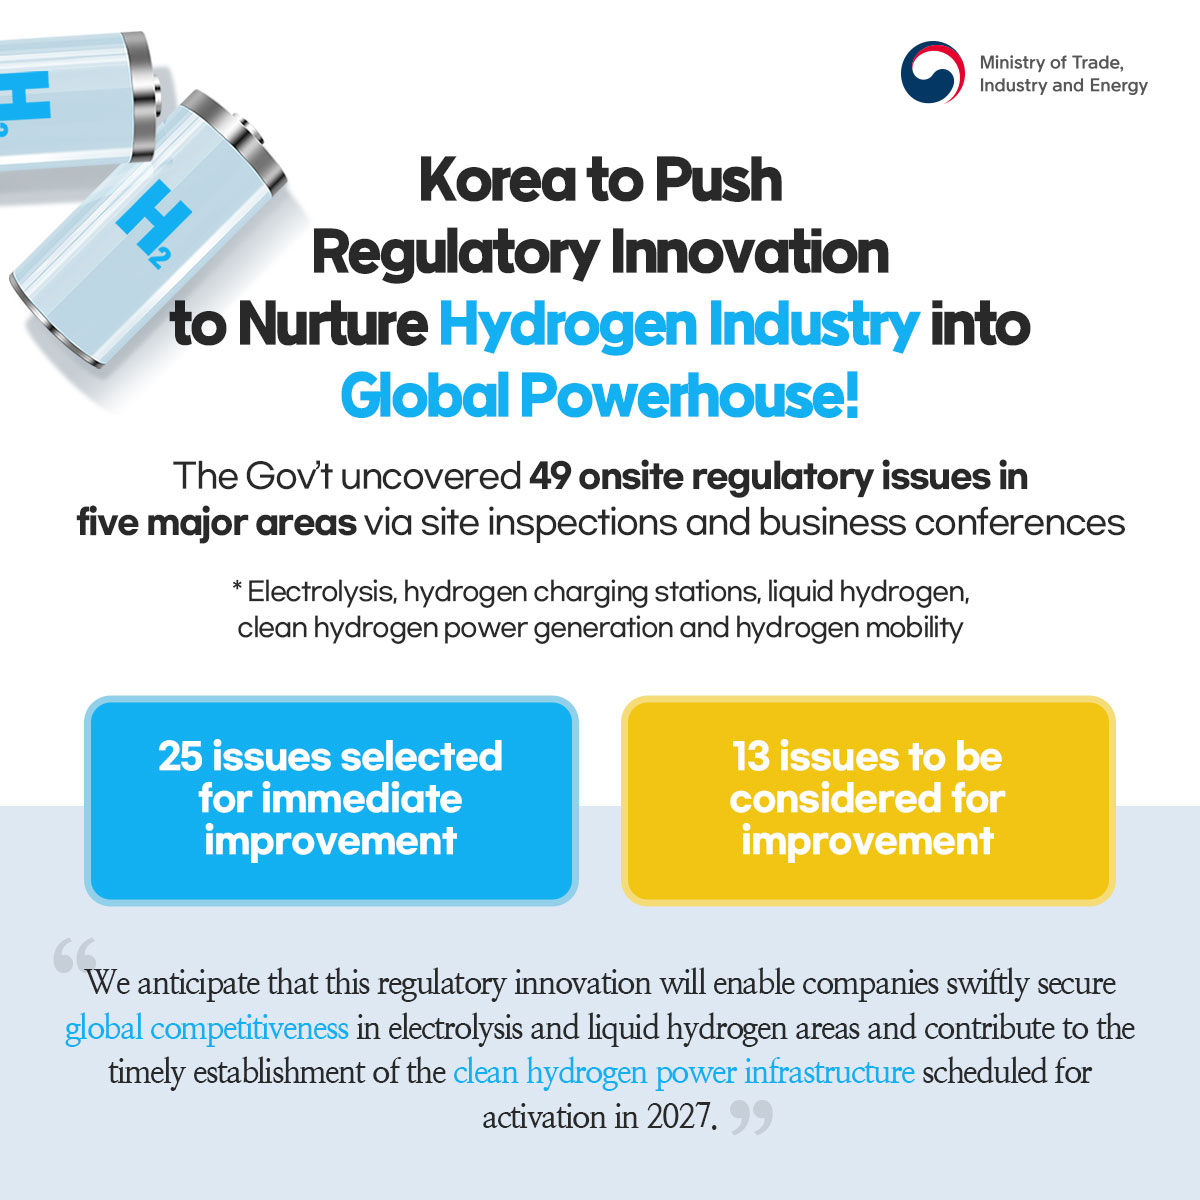 Korea to Push Regulatory Innovation to Nurture Hydrogen Industry into Global Powerhouse!!
The Gov't uncovered 49 onsite regulatory issues in five major areas via site inspections and business conferences
* Electrolysis, hydrogen charging stations, liquid hydrogen, clean hydrogen power generation and hydrogen mobility
25 issues selected for immediate improvement
13 issues to be considered for improvement
We anticipate that this regulatory innovation will enable companies swiftly secure global competitiveness in electrolysis and liquid hydrogen areas and contribute to the timely establishment of the clean hydrogen power infrastructure scheduled for activation in 2027.